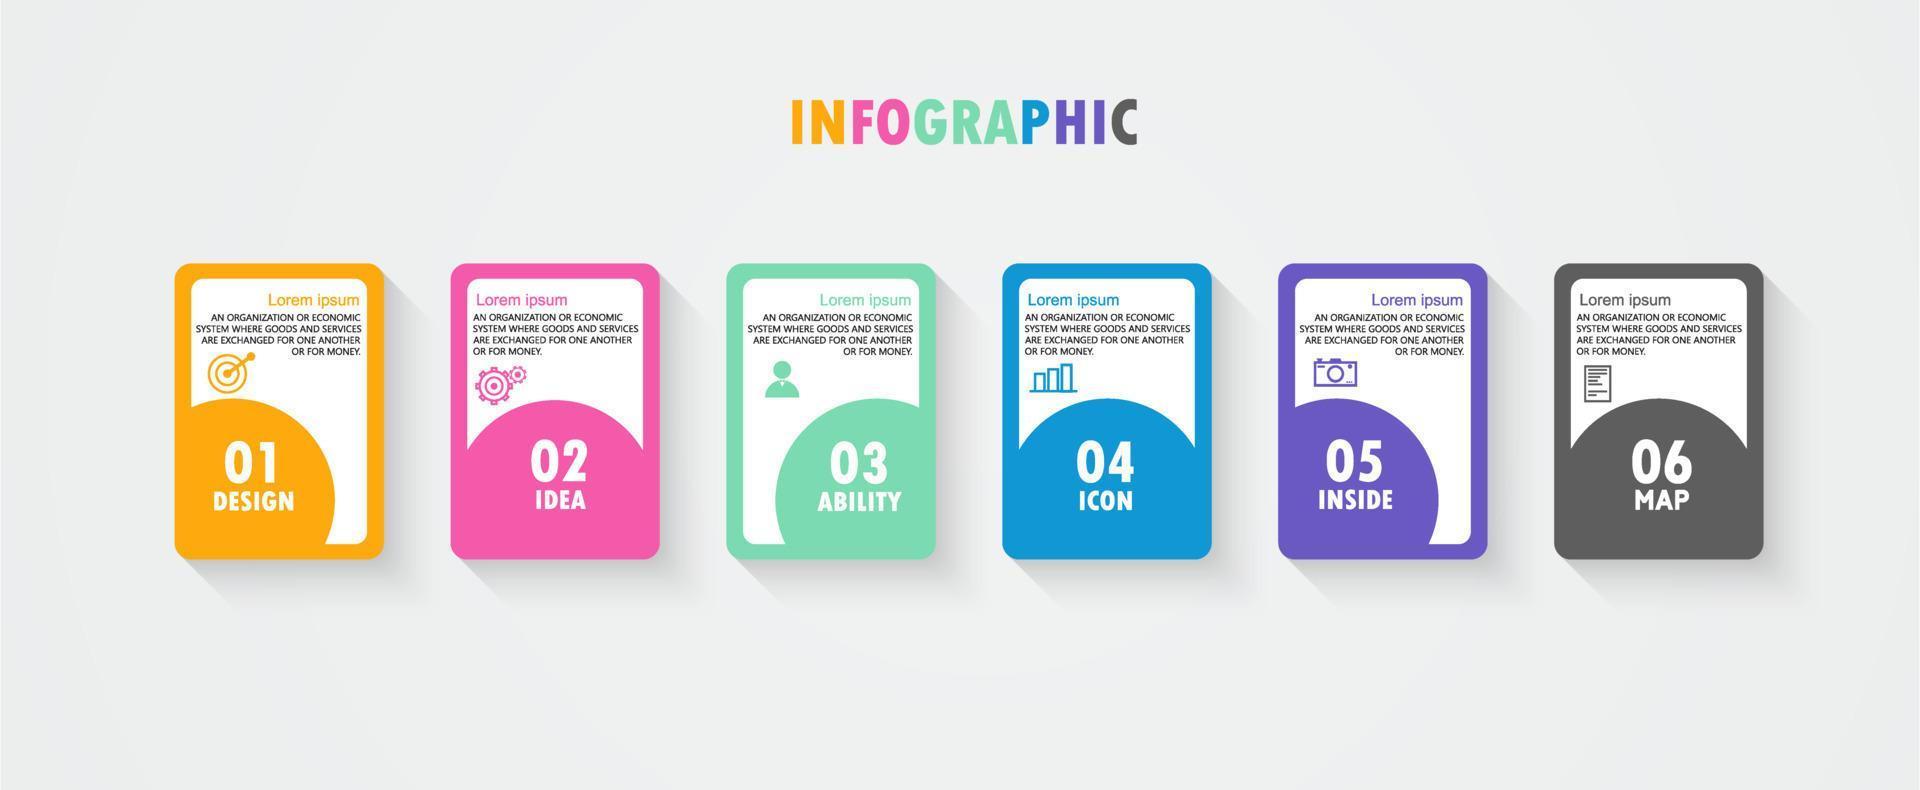 vector infographic label template with icon options or steps infographics for business ideas presentations It can be used for information graphics, presentations, websites, banners, print media.